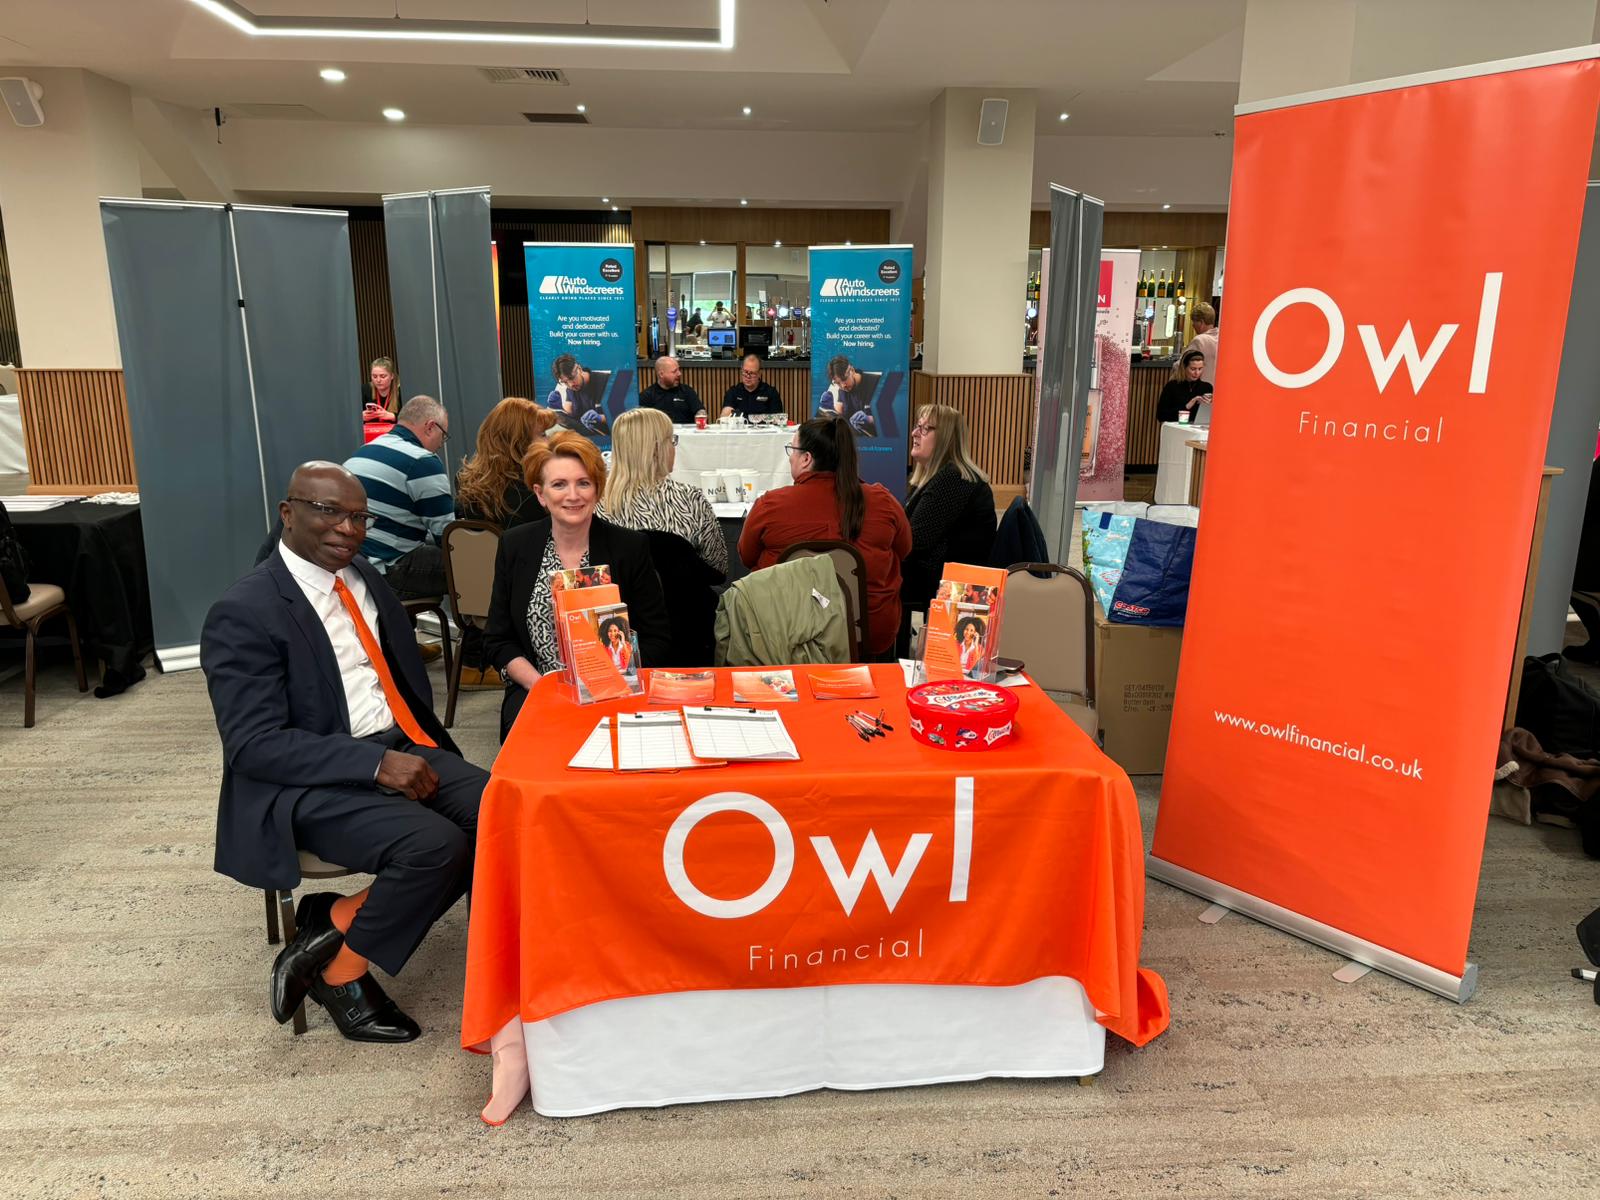 Owl Financial at our event in Sunderland